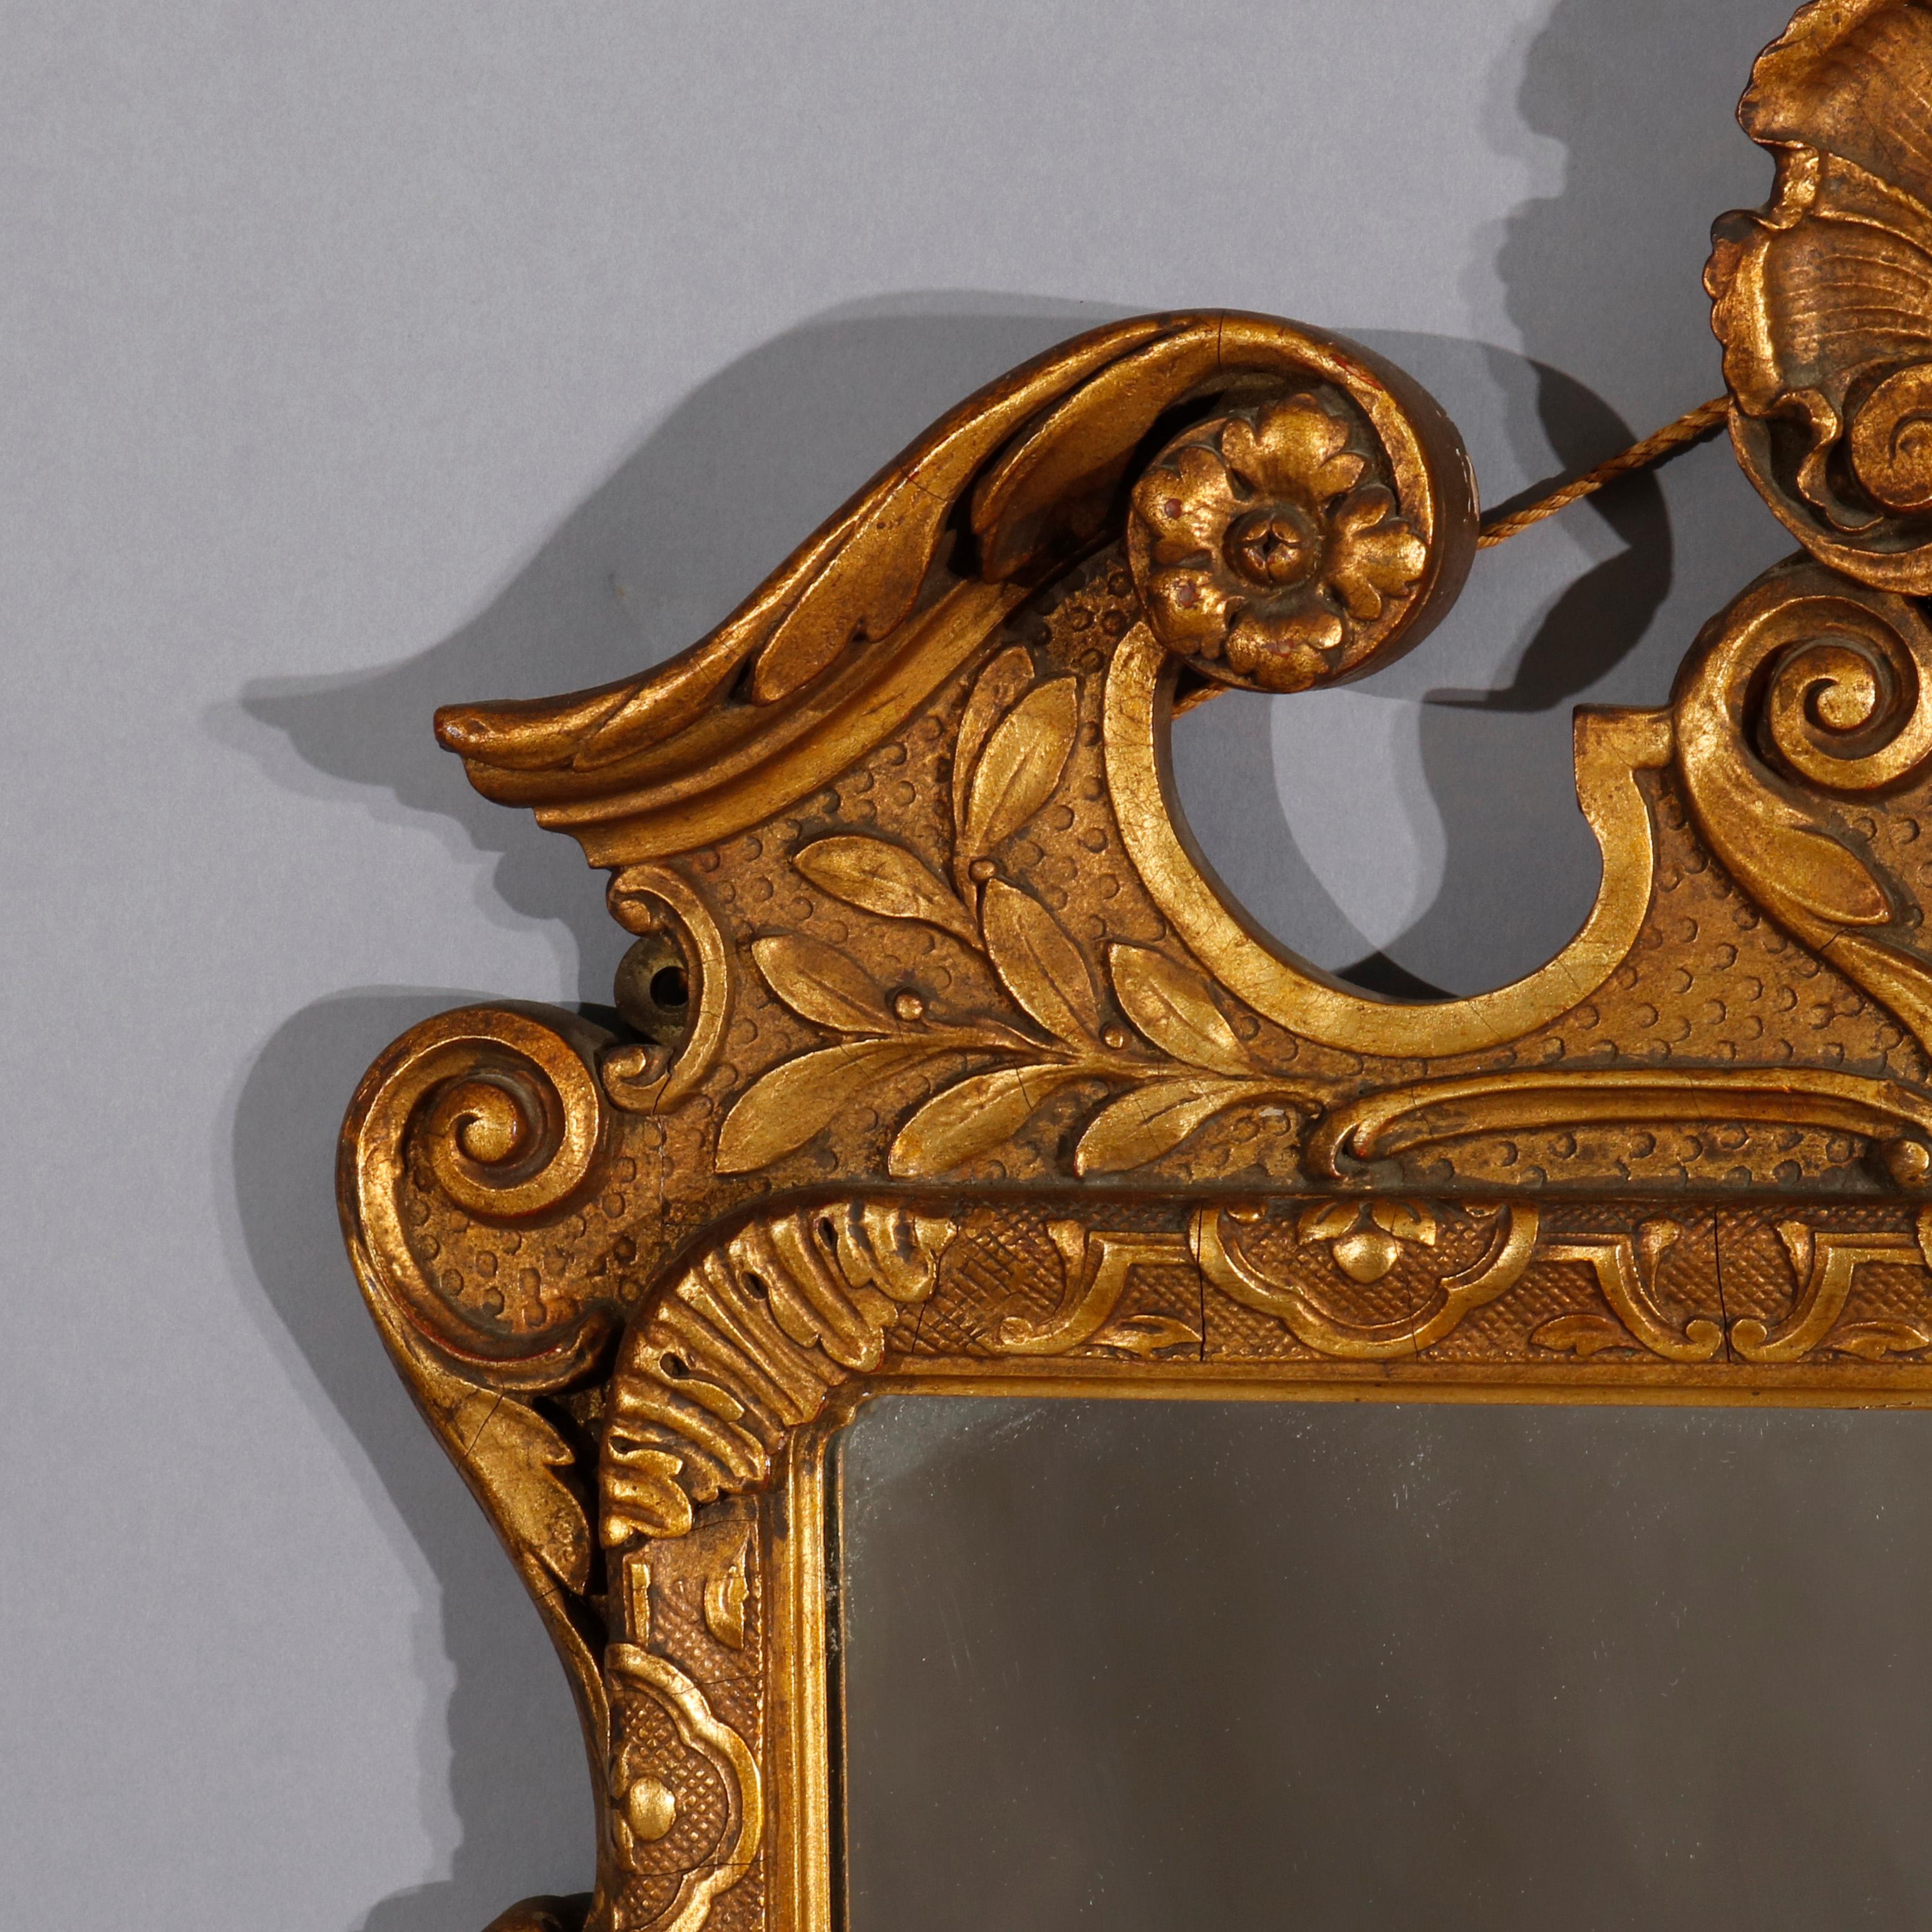 An antique French Louis XVI style wall mirror offers giltwood frame with broken arch crest having central shell cartouche surmounting frame with foliate and scroll embossed decoration and shell at base, 20th century.

Measures: 39.75